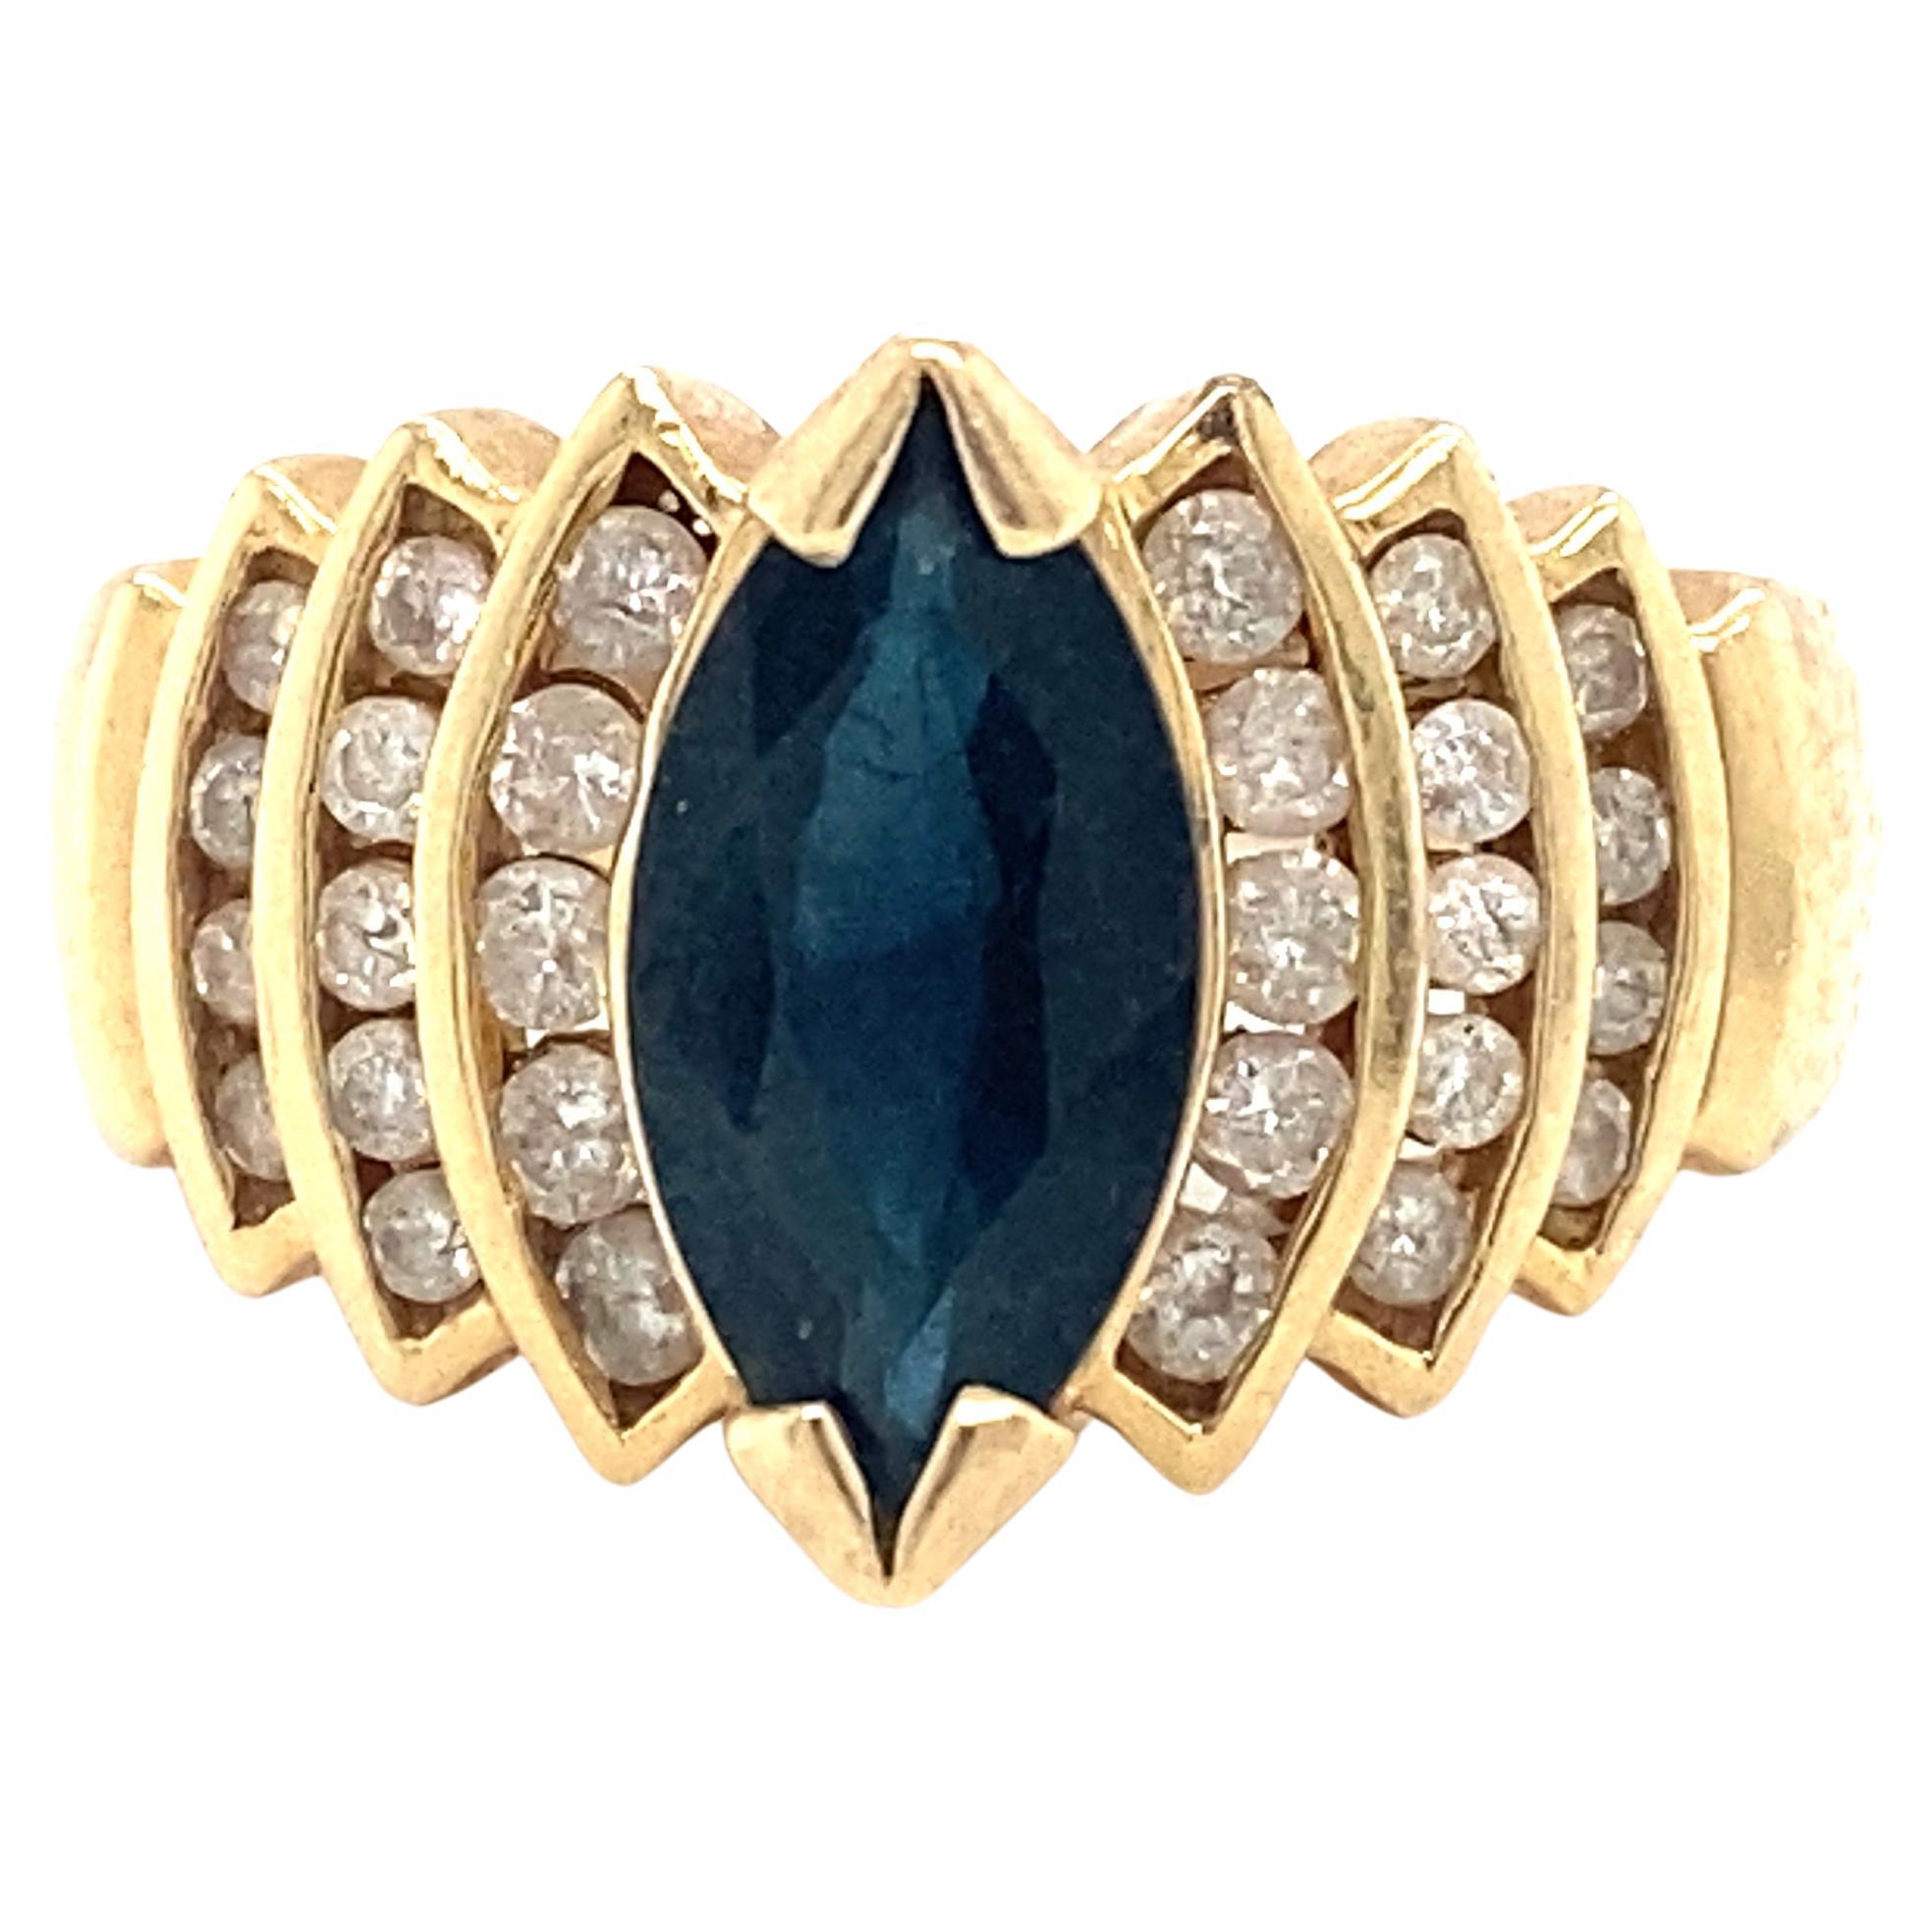 Circa 2000s Sapphire and Diamond Waterfall Ring in 14K Gold